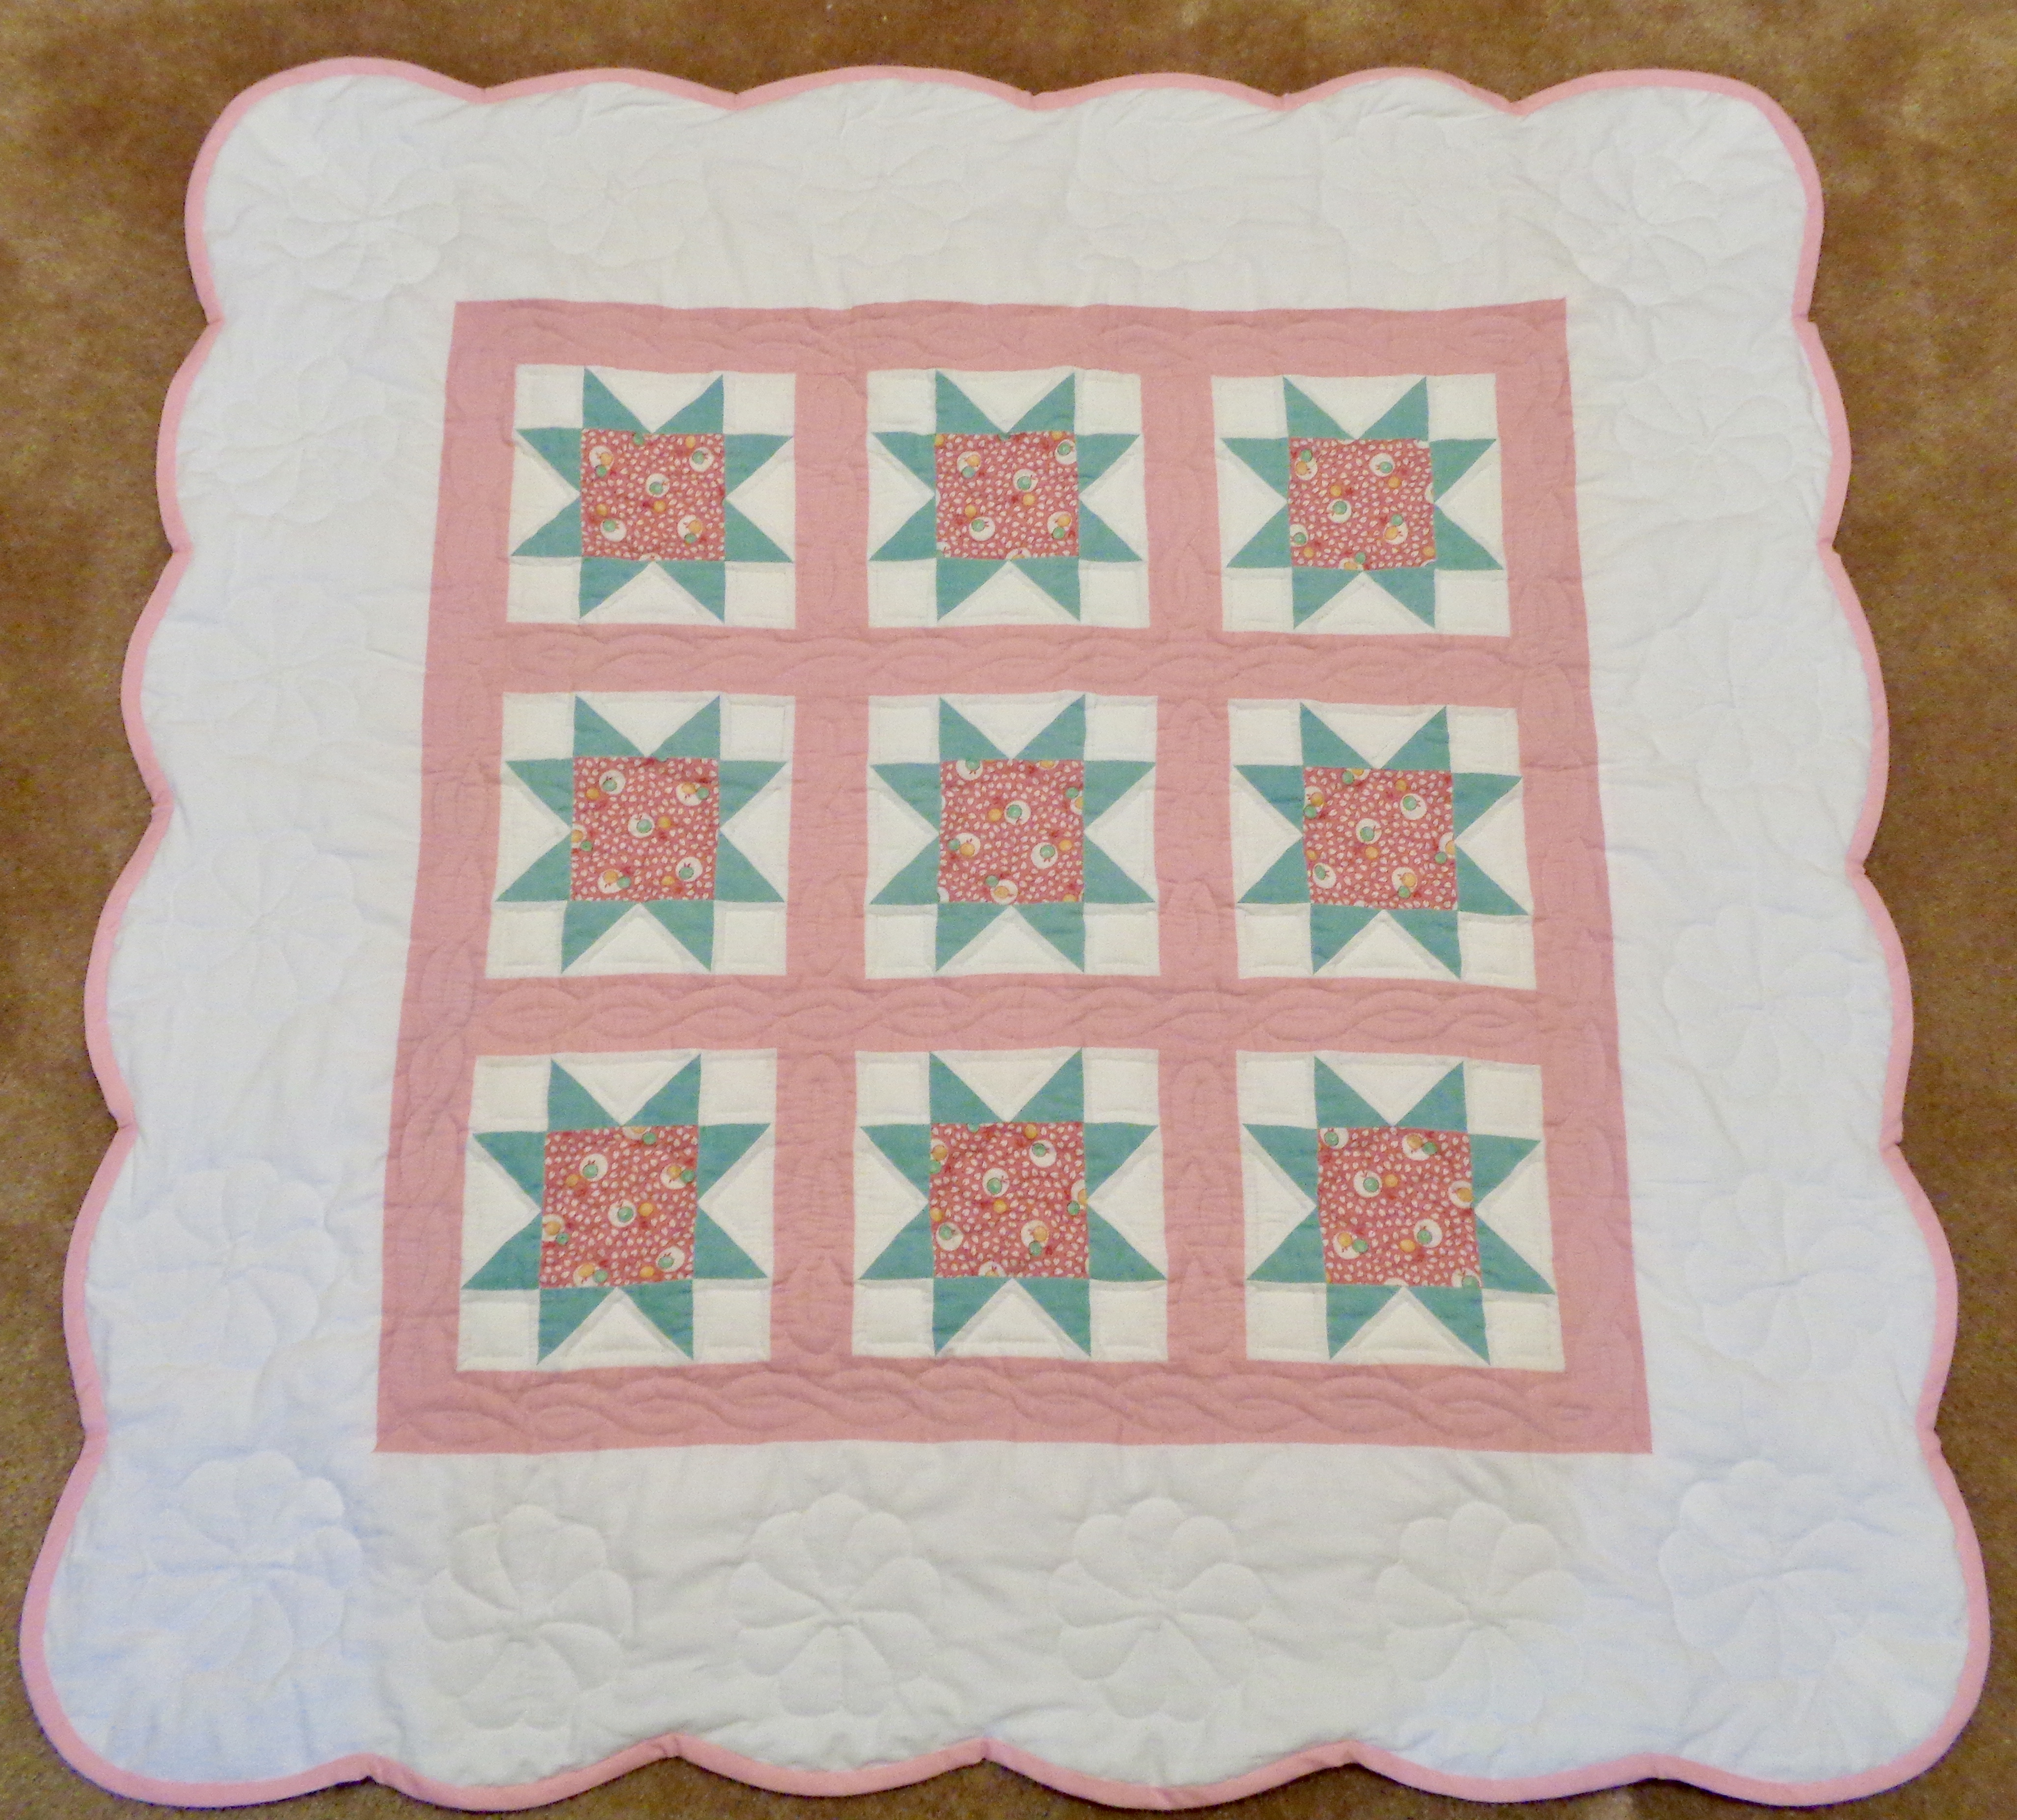 Baby Quilt Embroidery Patterns Free Embroidery Designs Cute Embroidery Designs